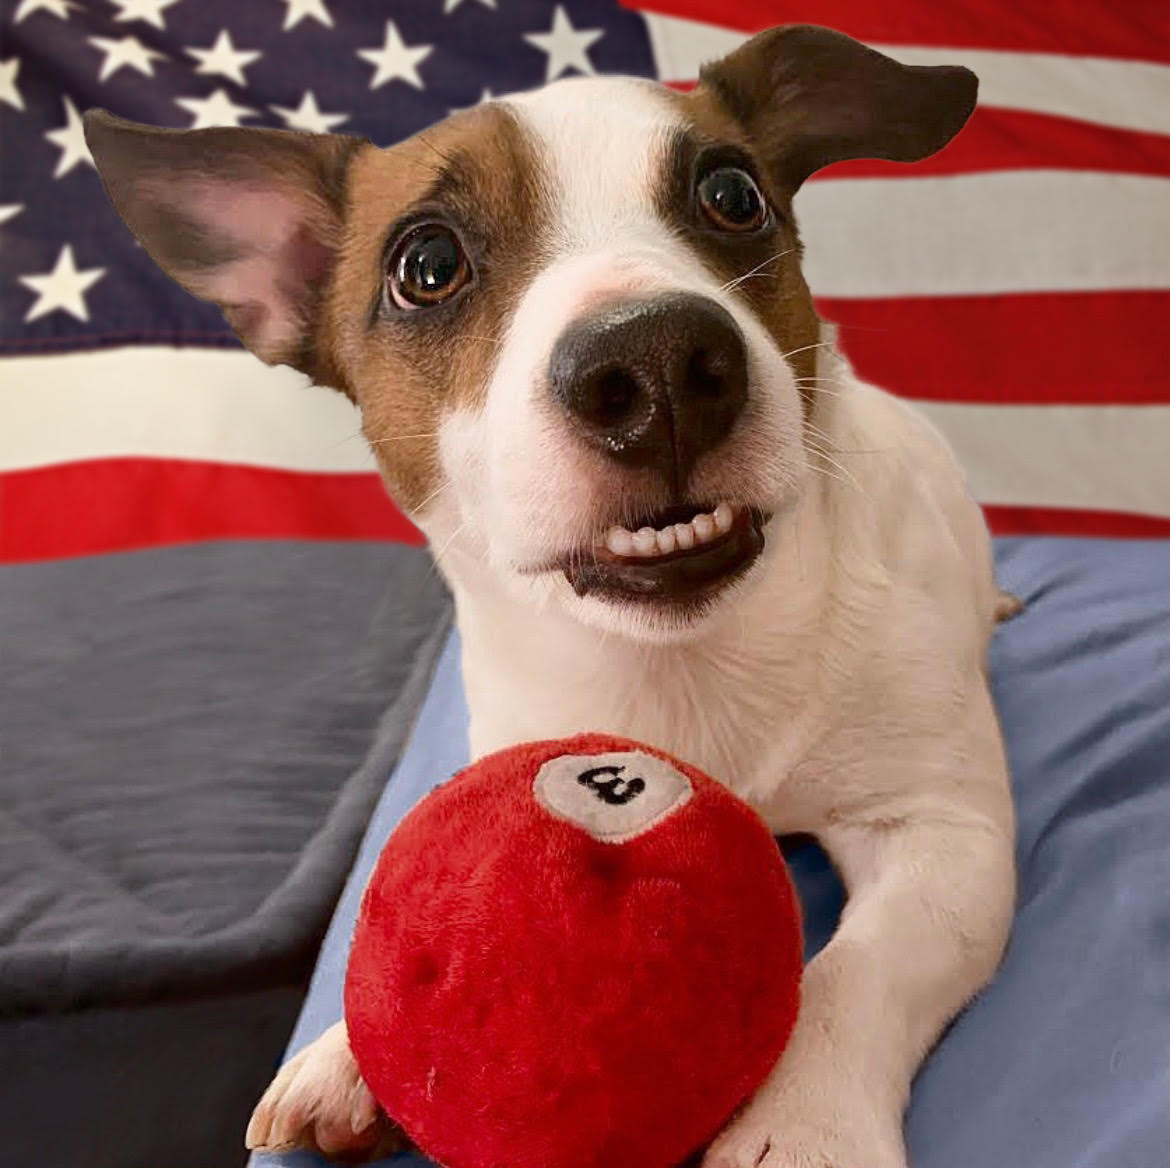 Have a great Memorial Day, everyone 🇺🇸 ❤️ 🐶 I’ll bring my ball to you so we can play! Quiet relaxation is overrated anyway 😝

#memorialday #dogfriendlynyc #dogsofnyc #jackrussellnation #nyc #9gag #barked #animalsdoingthings #jrt #jackrusselldog #astro #dogs #dog #cute #cuteness…